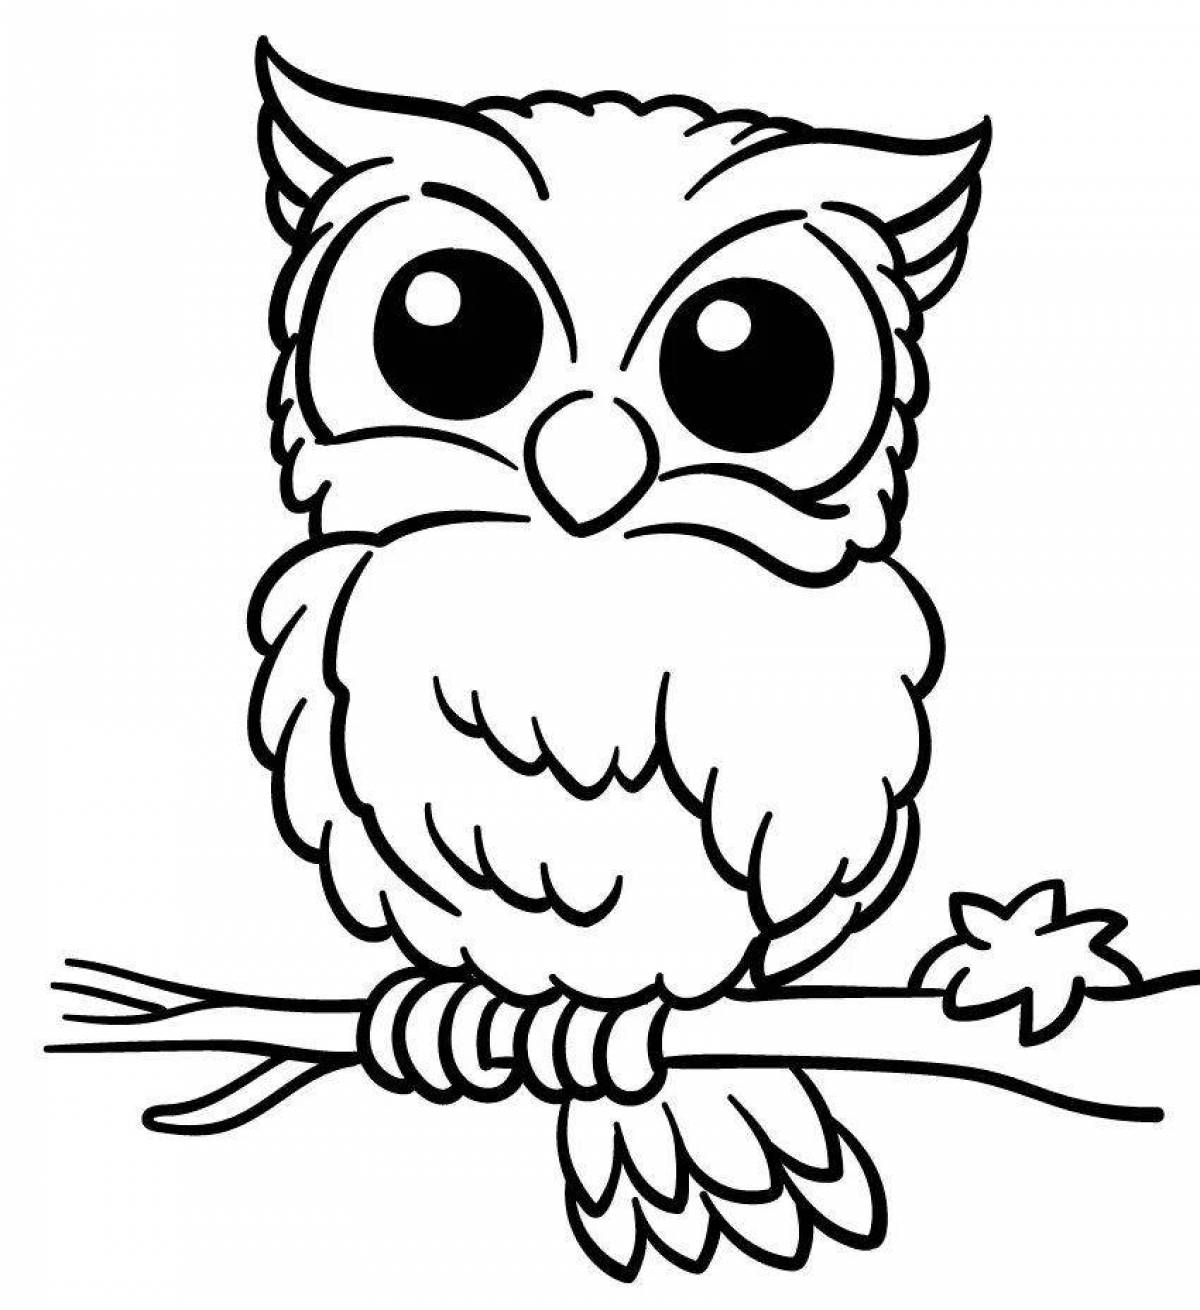 Coloring page magical christmas owl